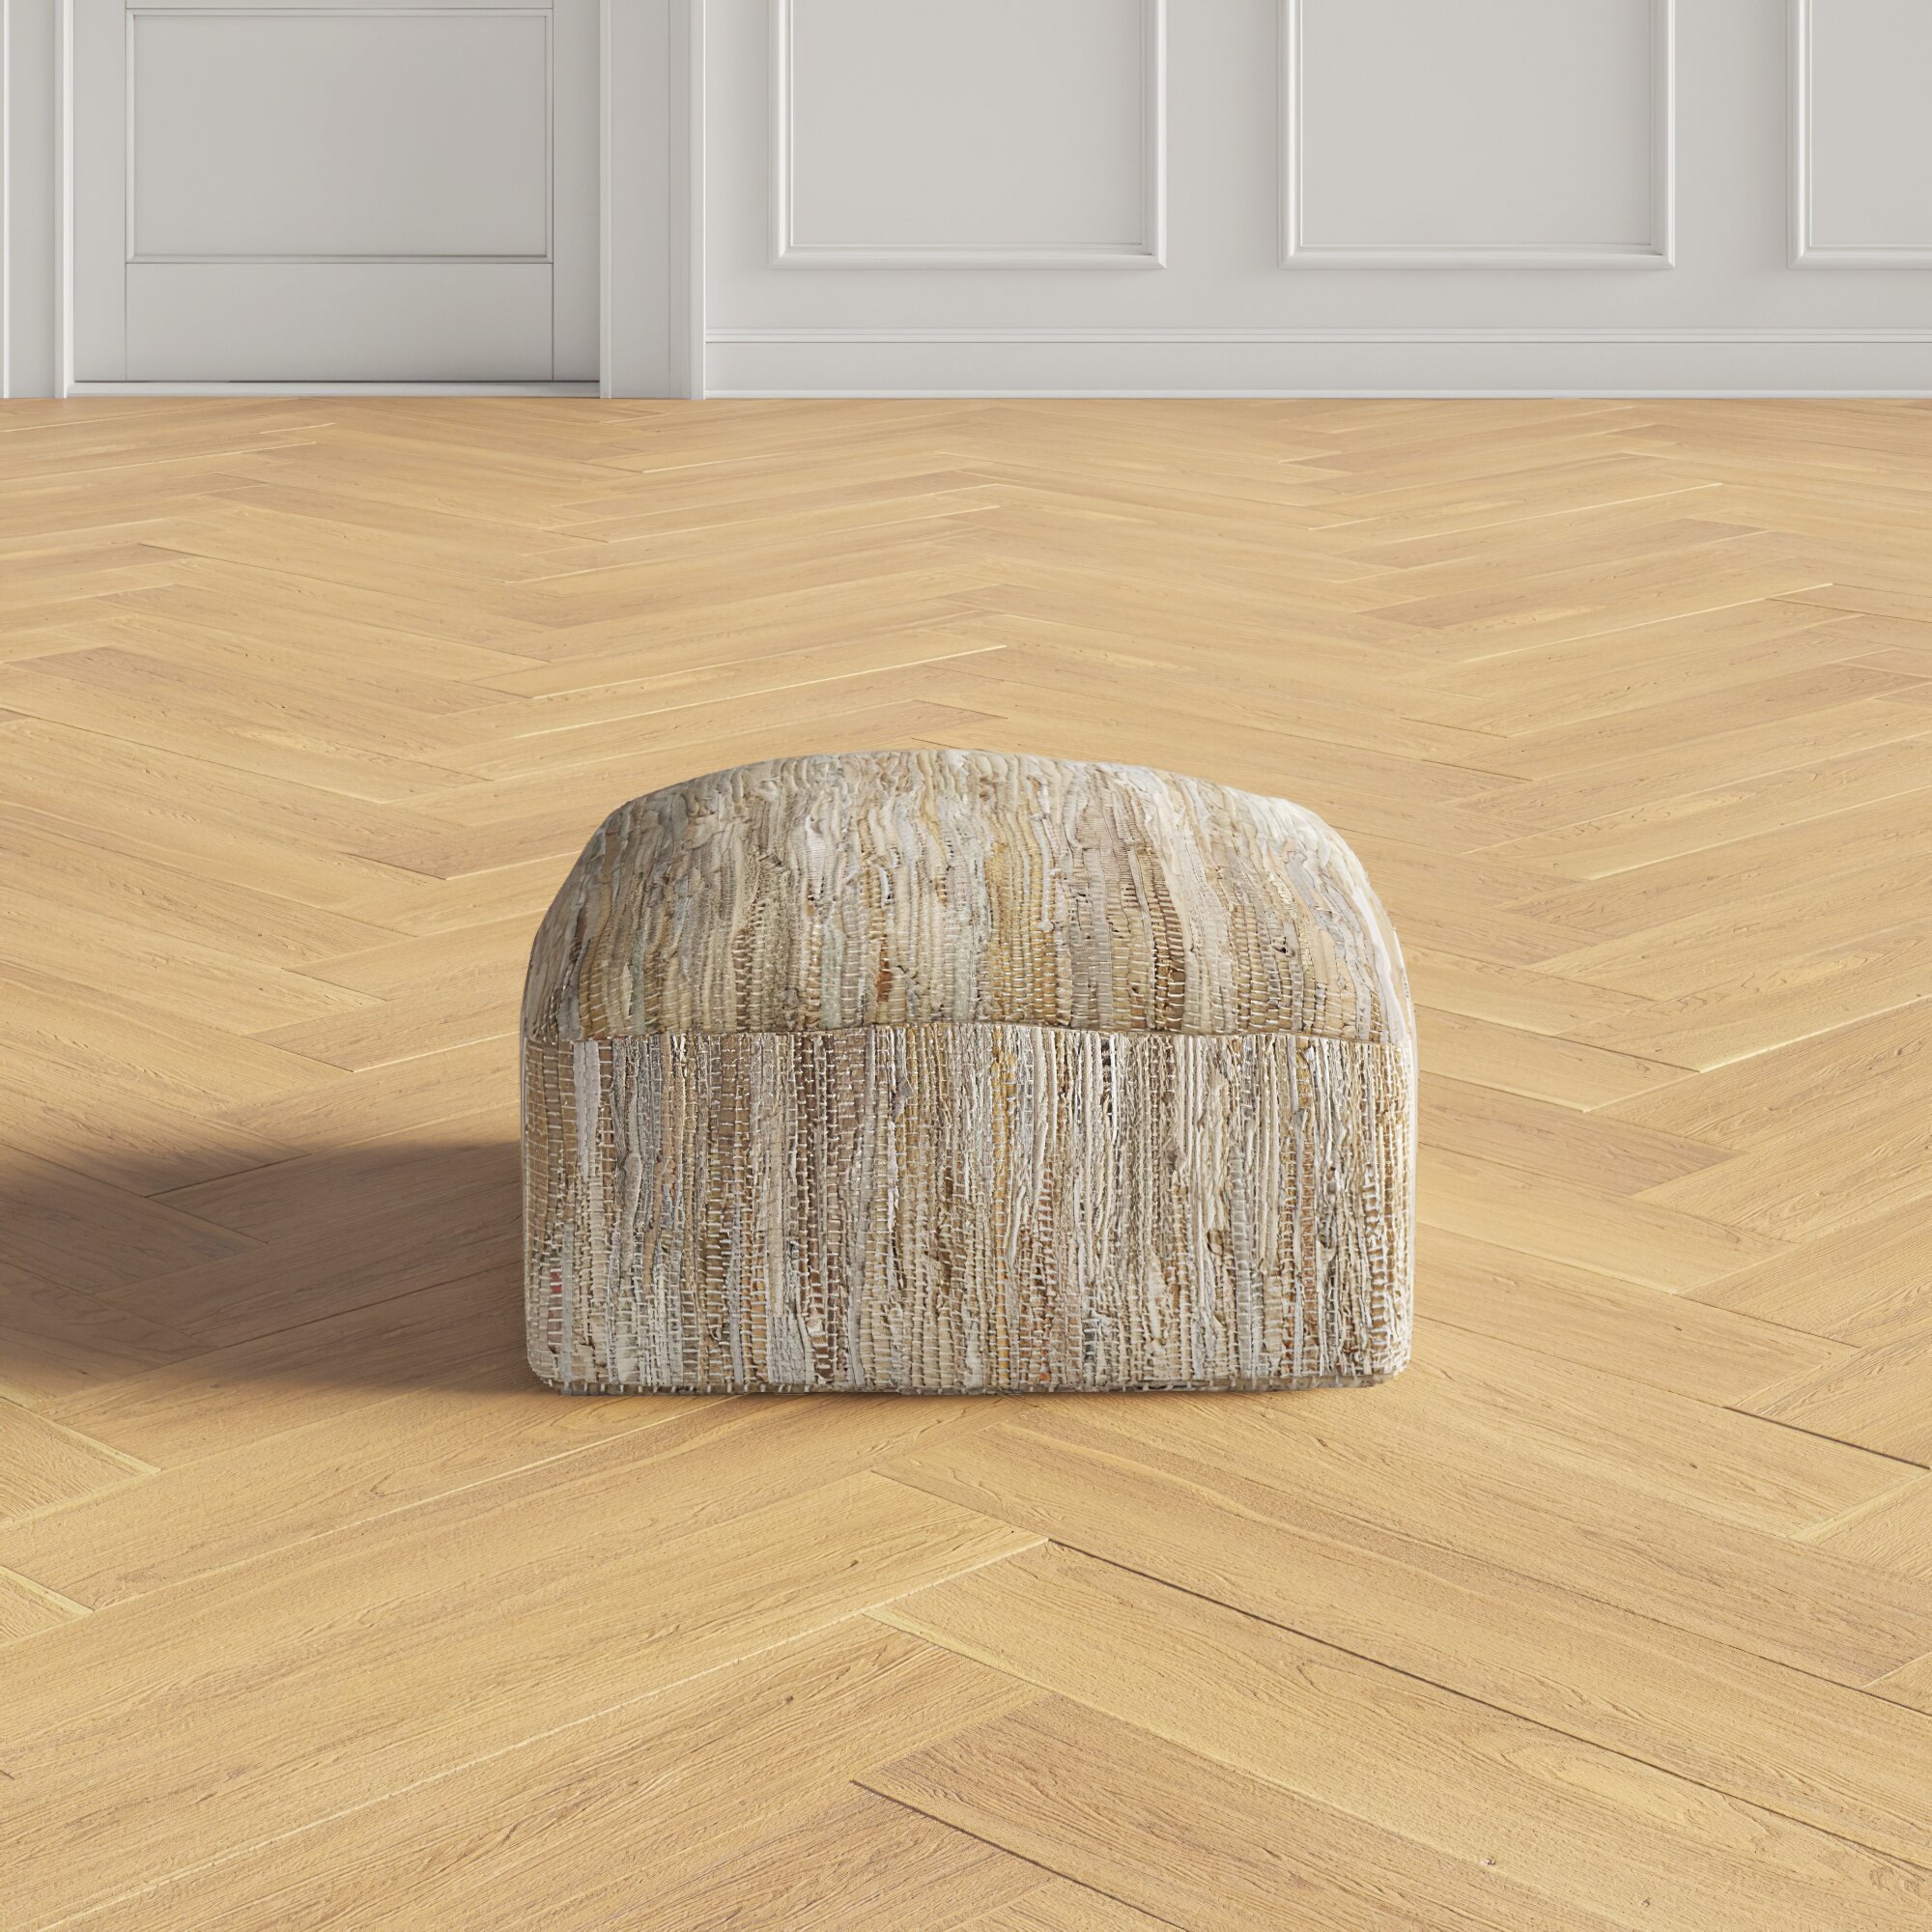 Bolin Leather Pouf